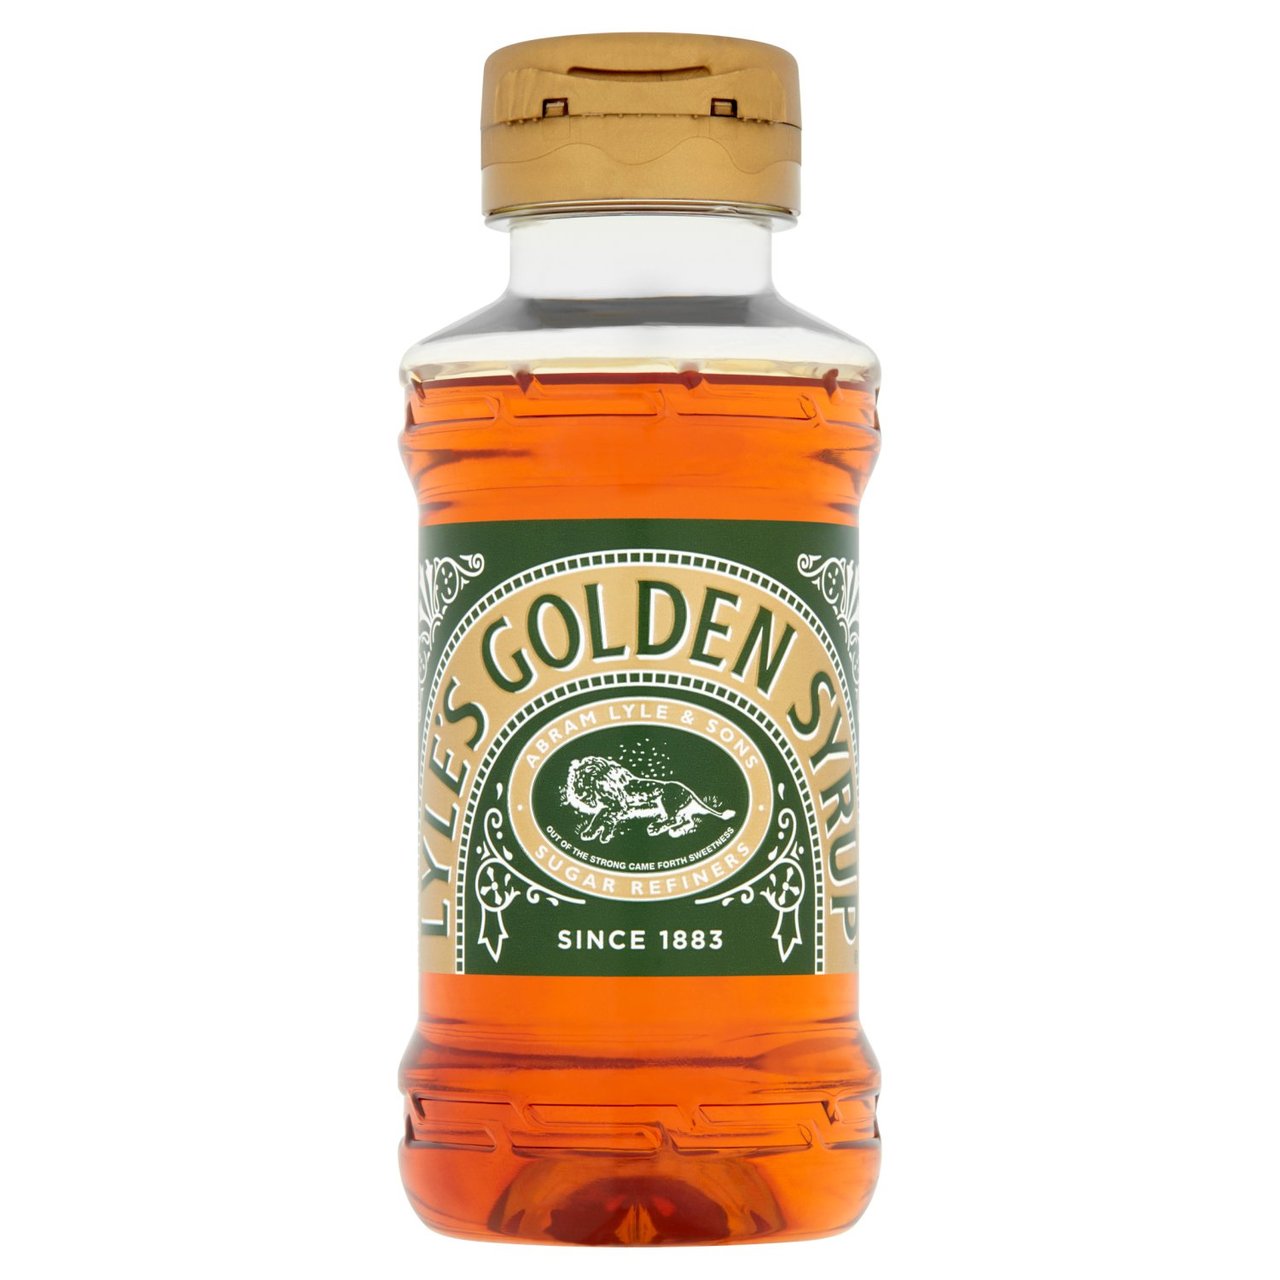 LYLE'S golden syrup 325g